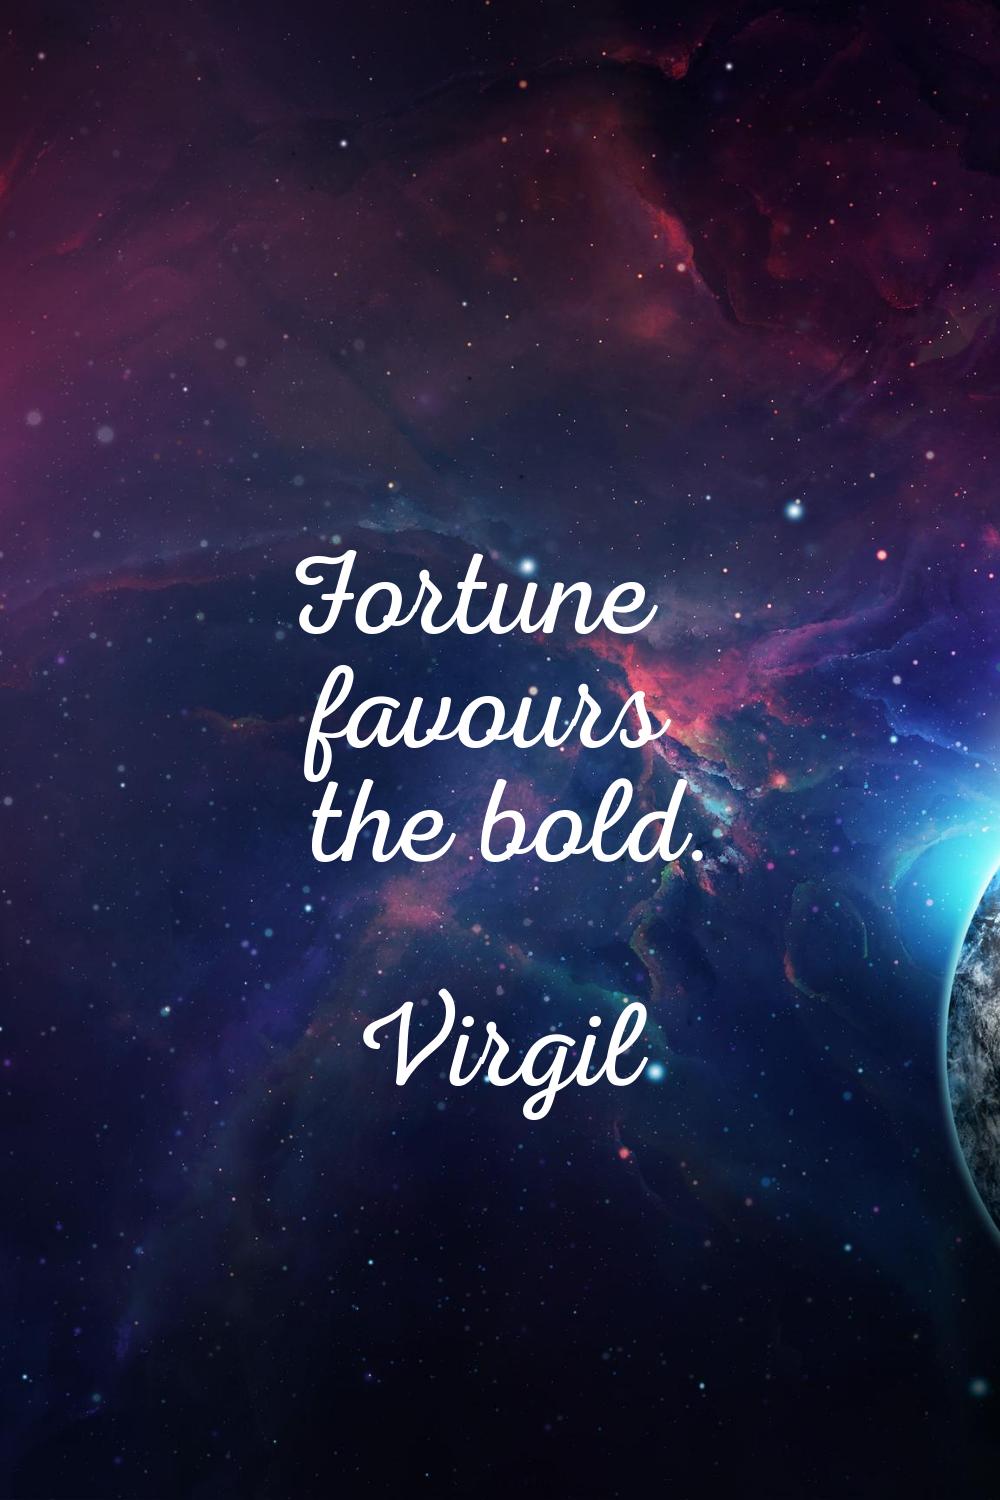 Fortune favours the bold.